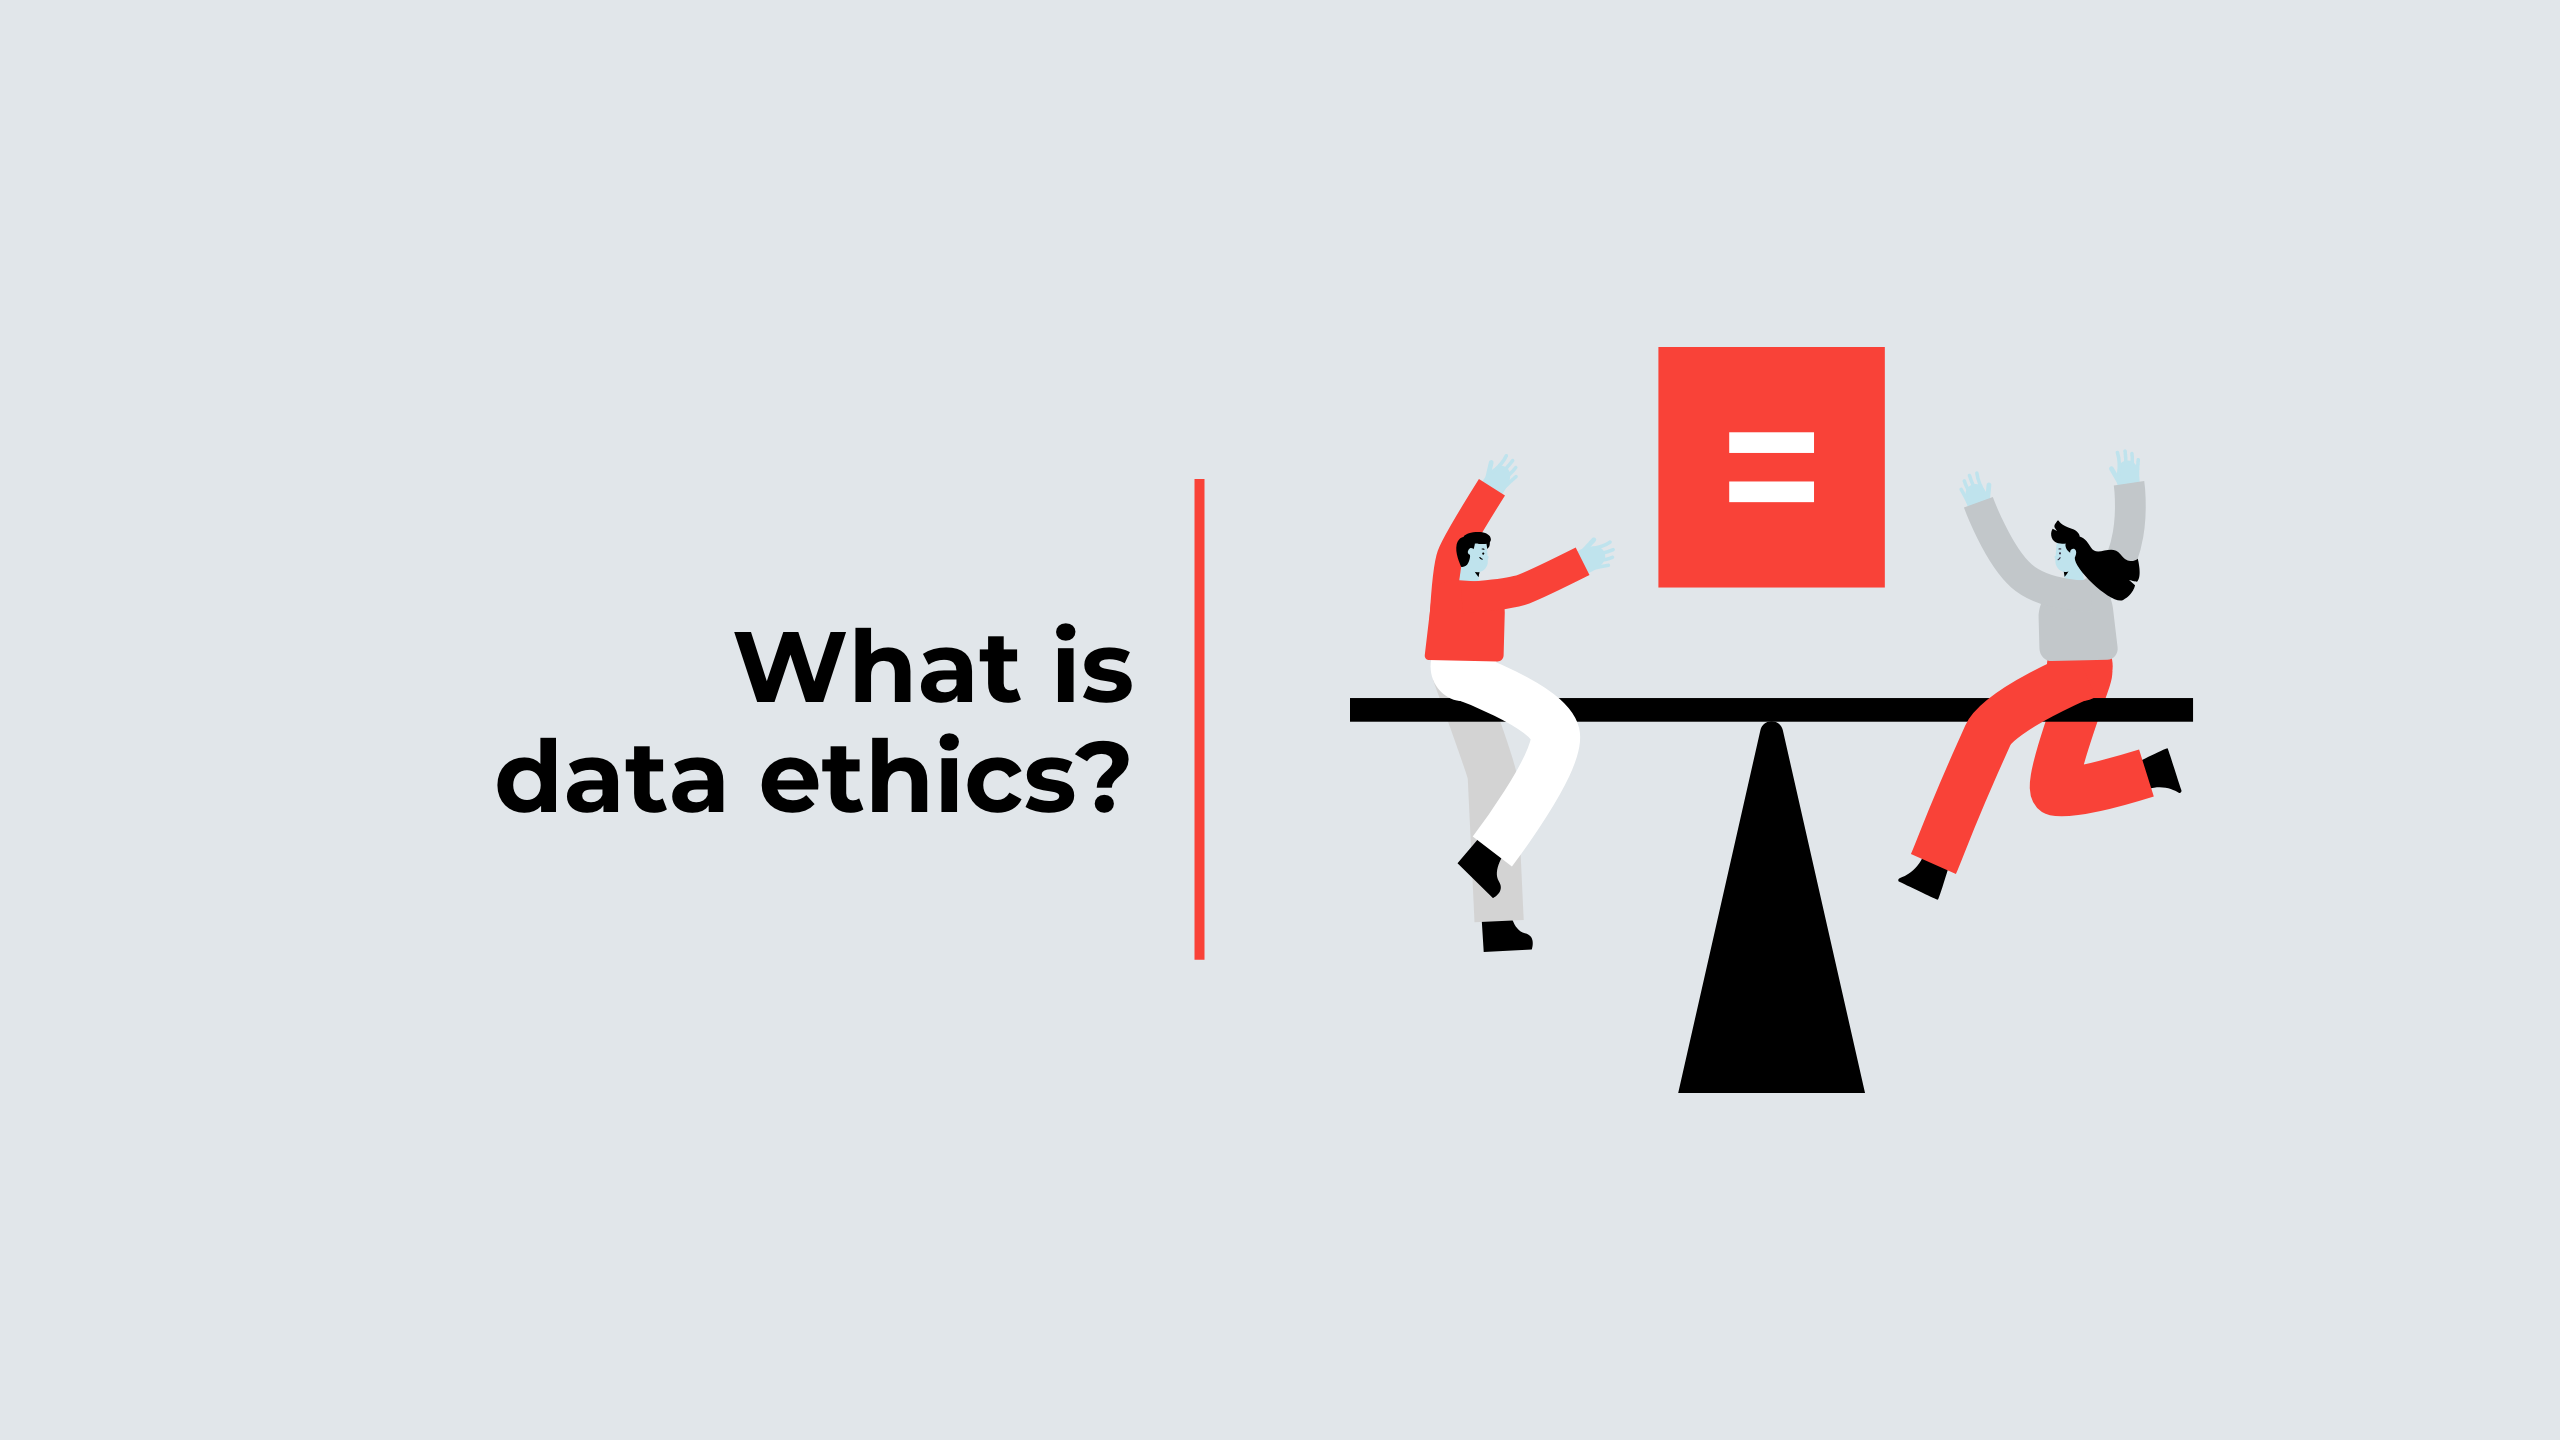 What is data ethics?